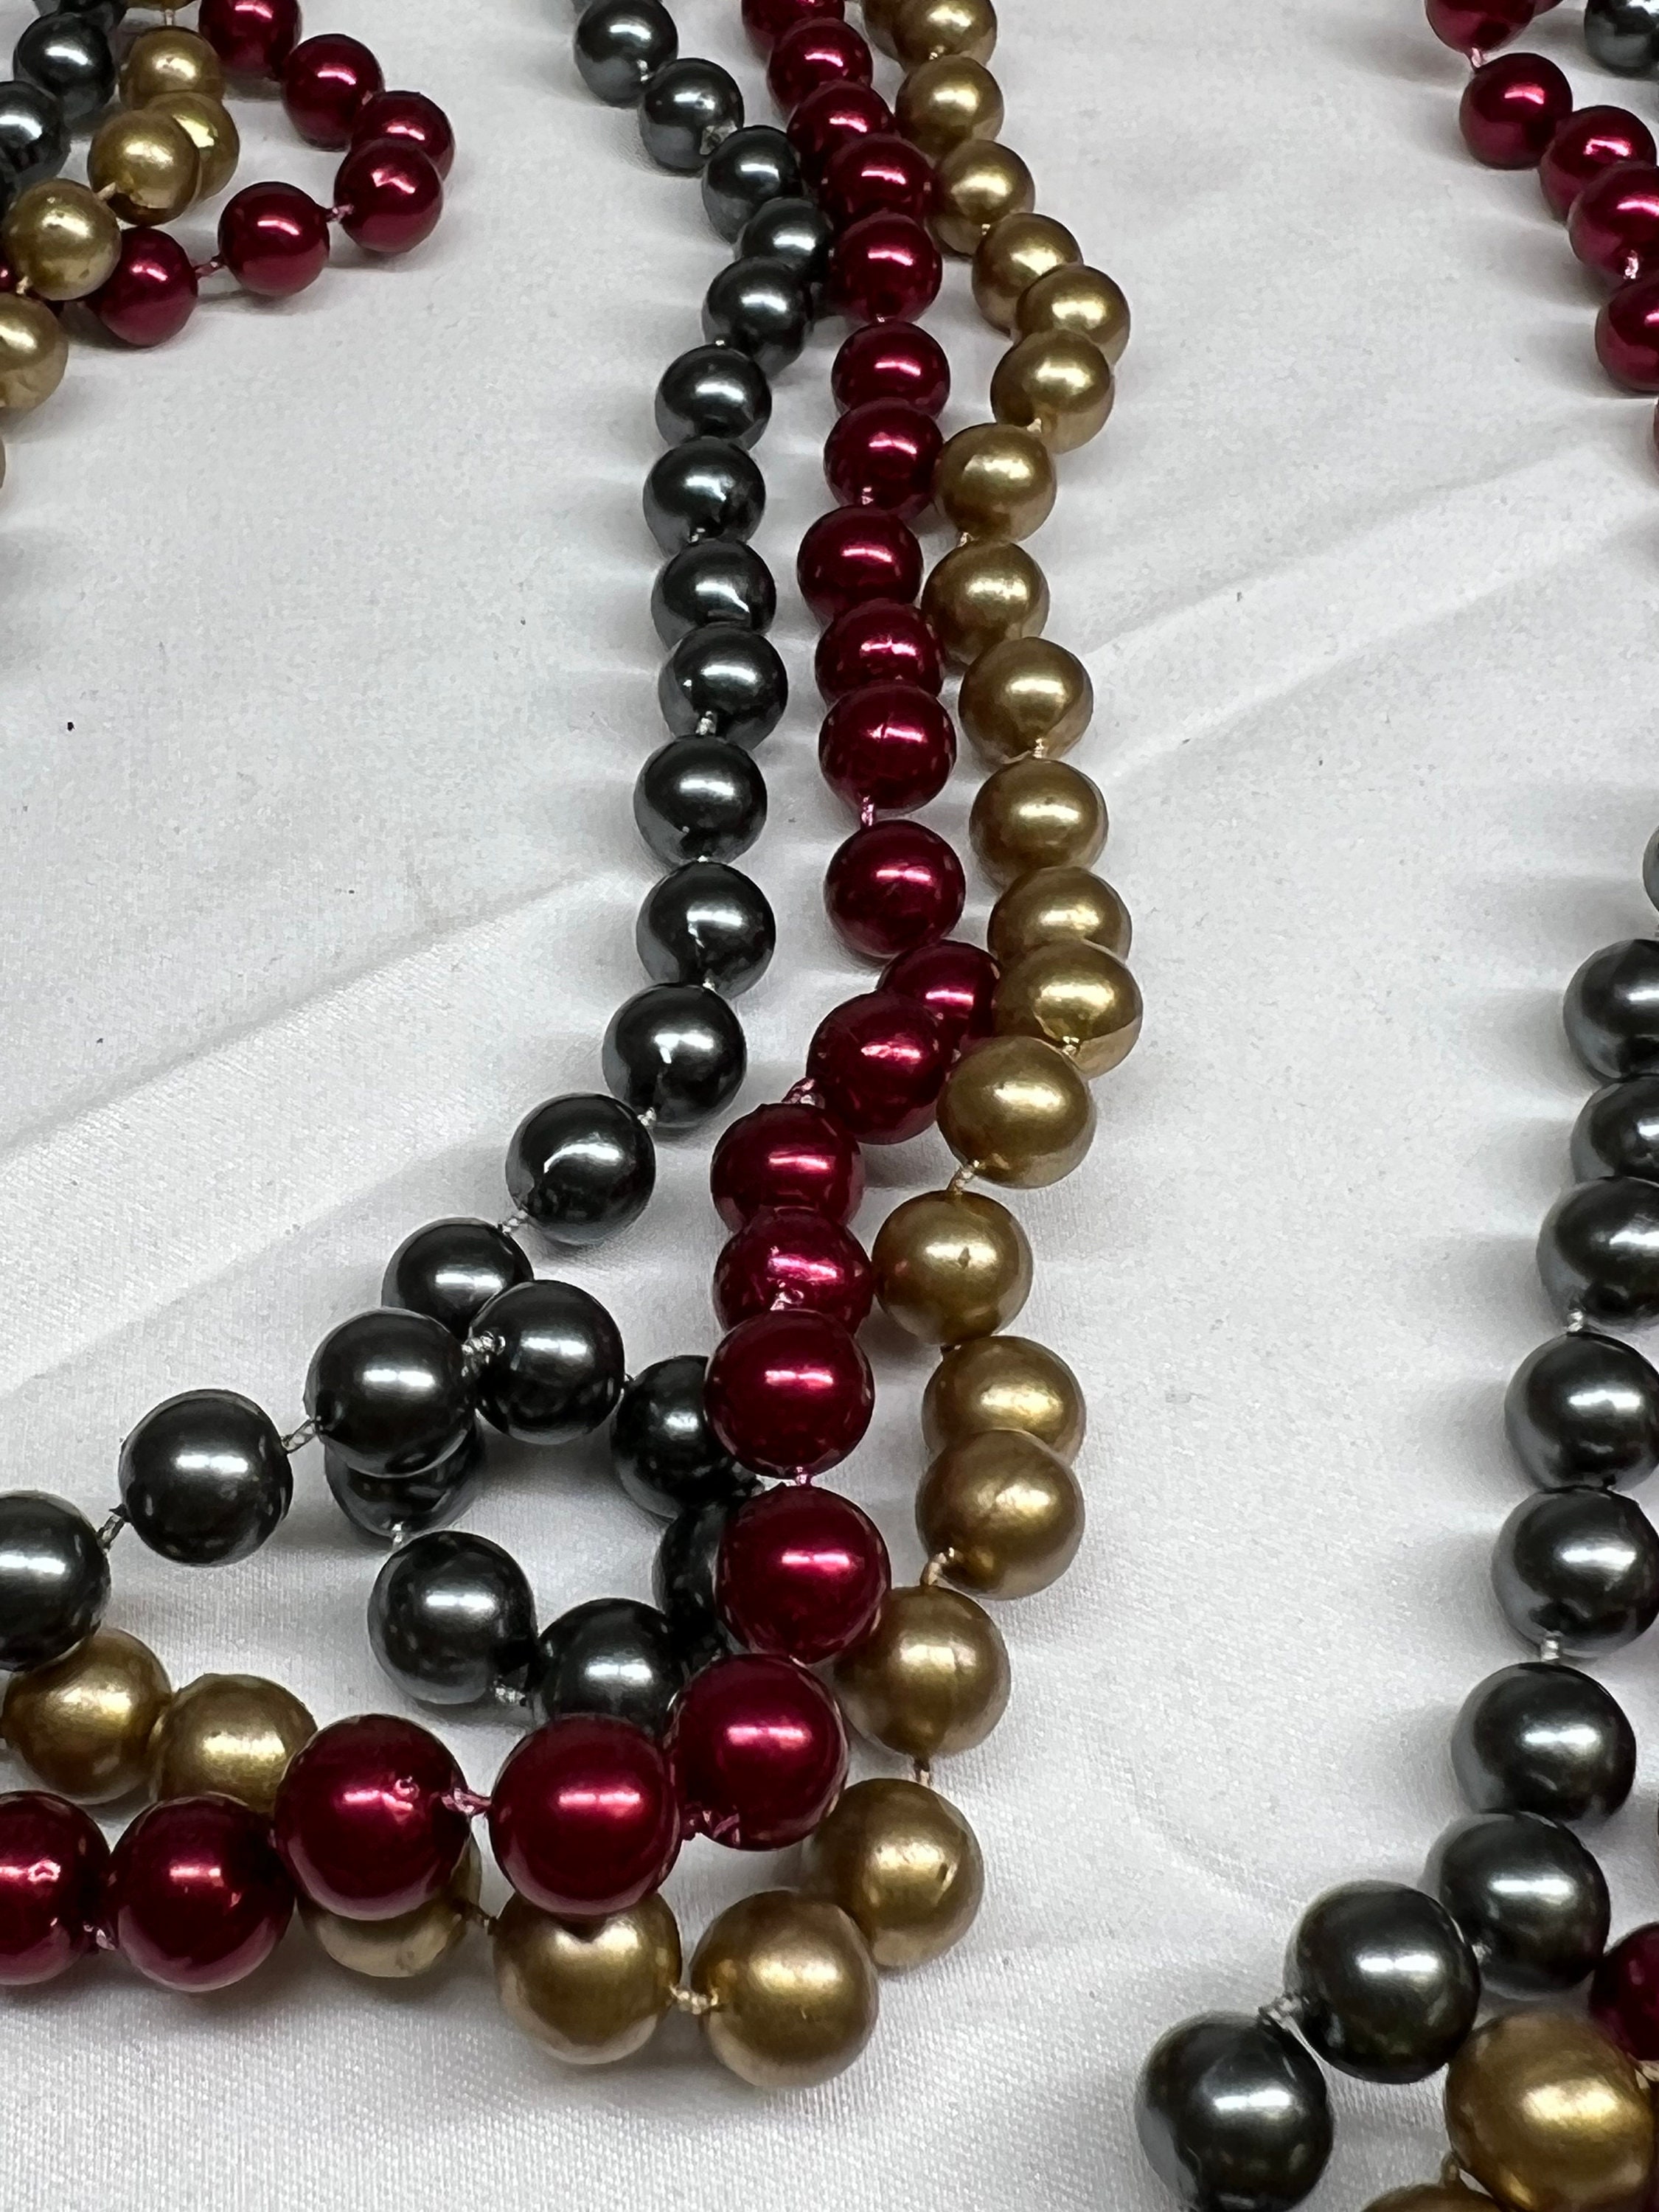  NVENF Mardi Gras Beads Charms for Jewelry Making, Gold